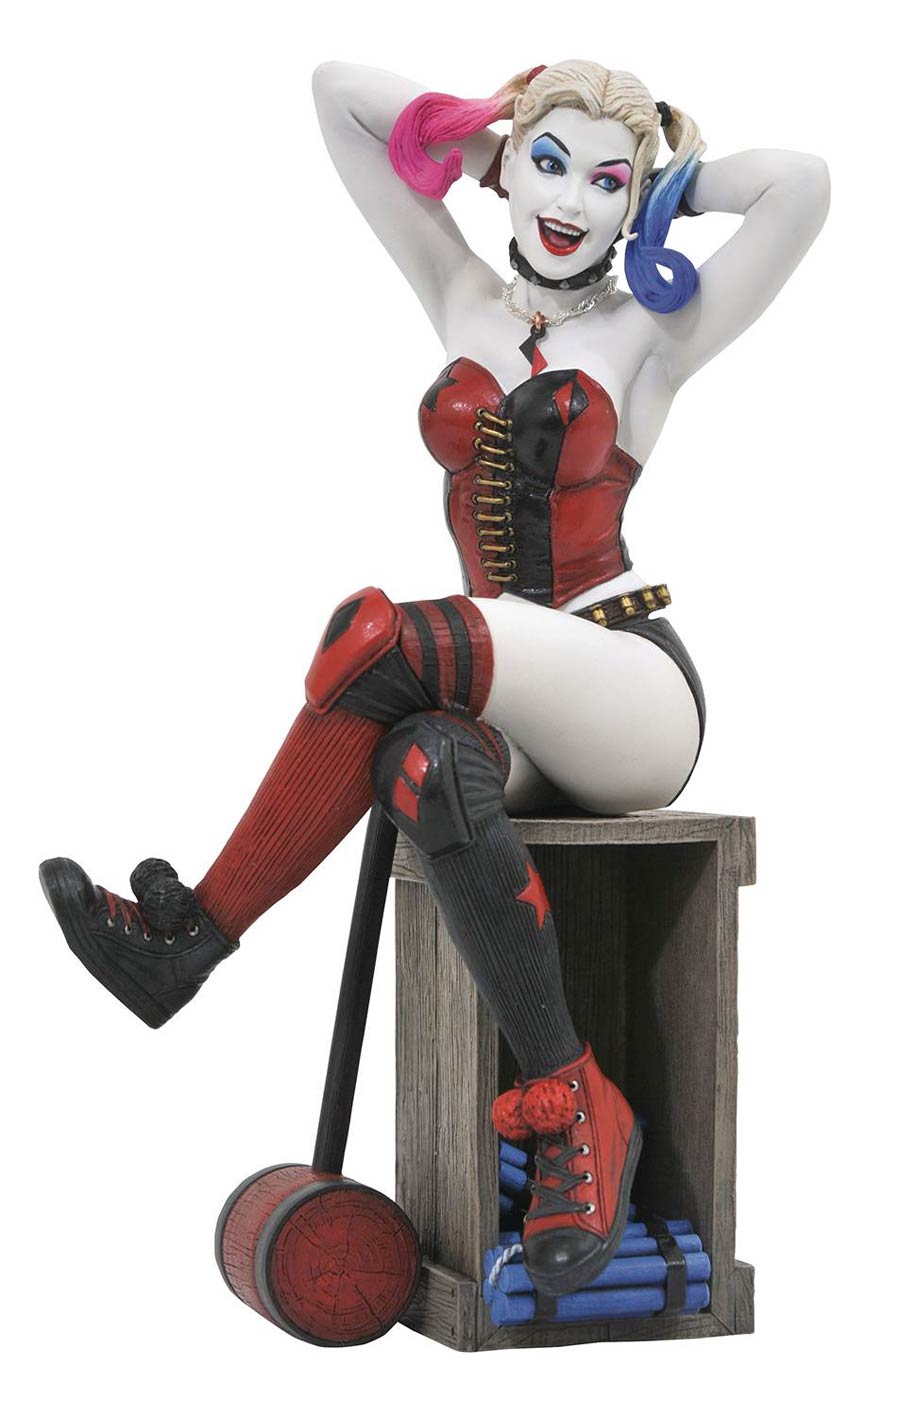 DC Gallery Suicide Squad Harley Quinn PVC Diorama Figure